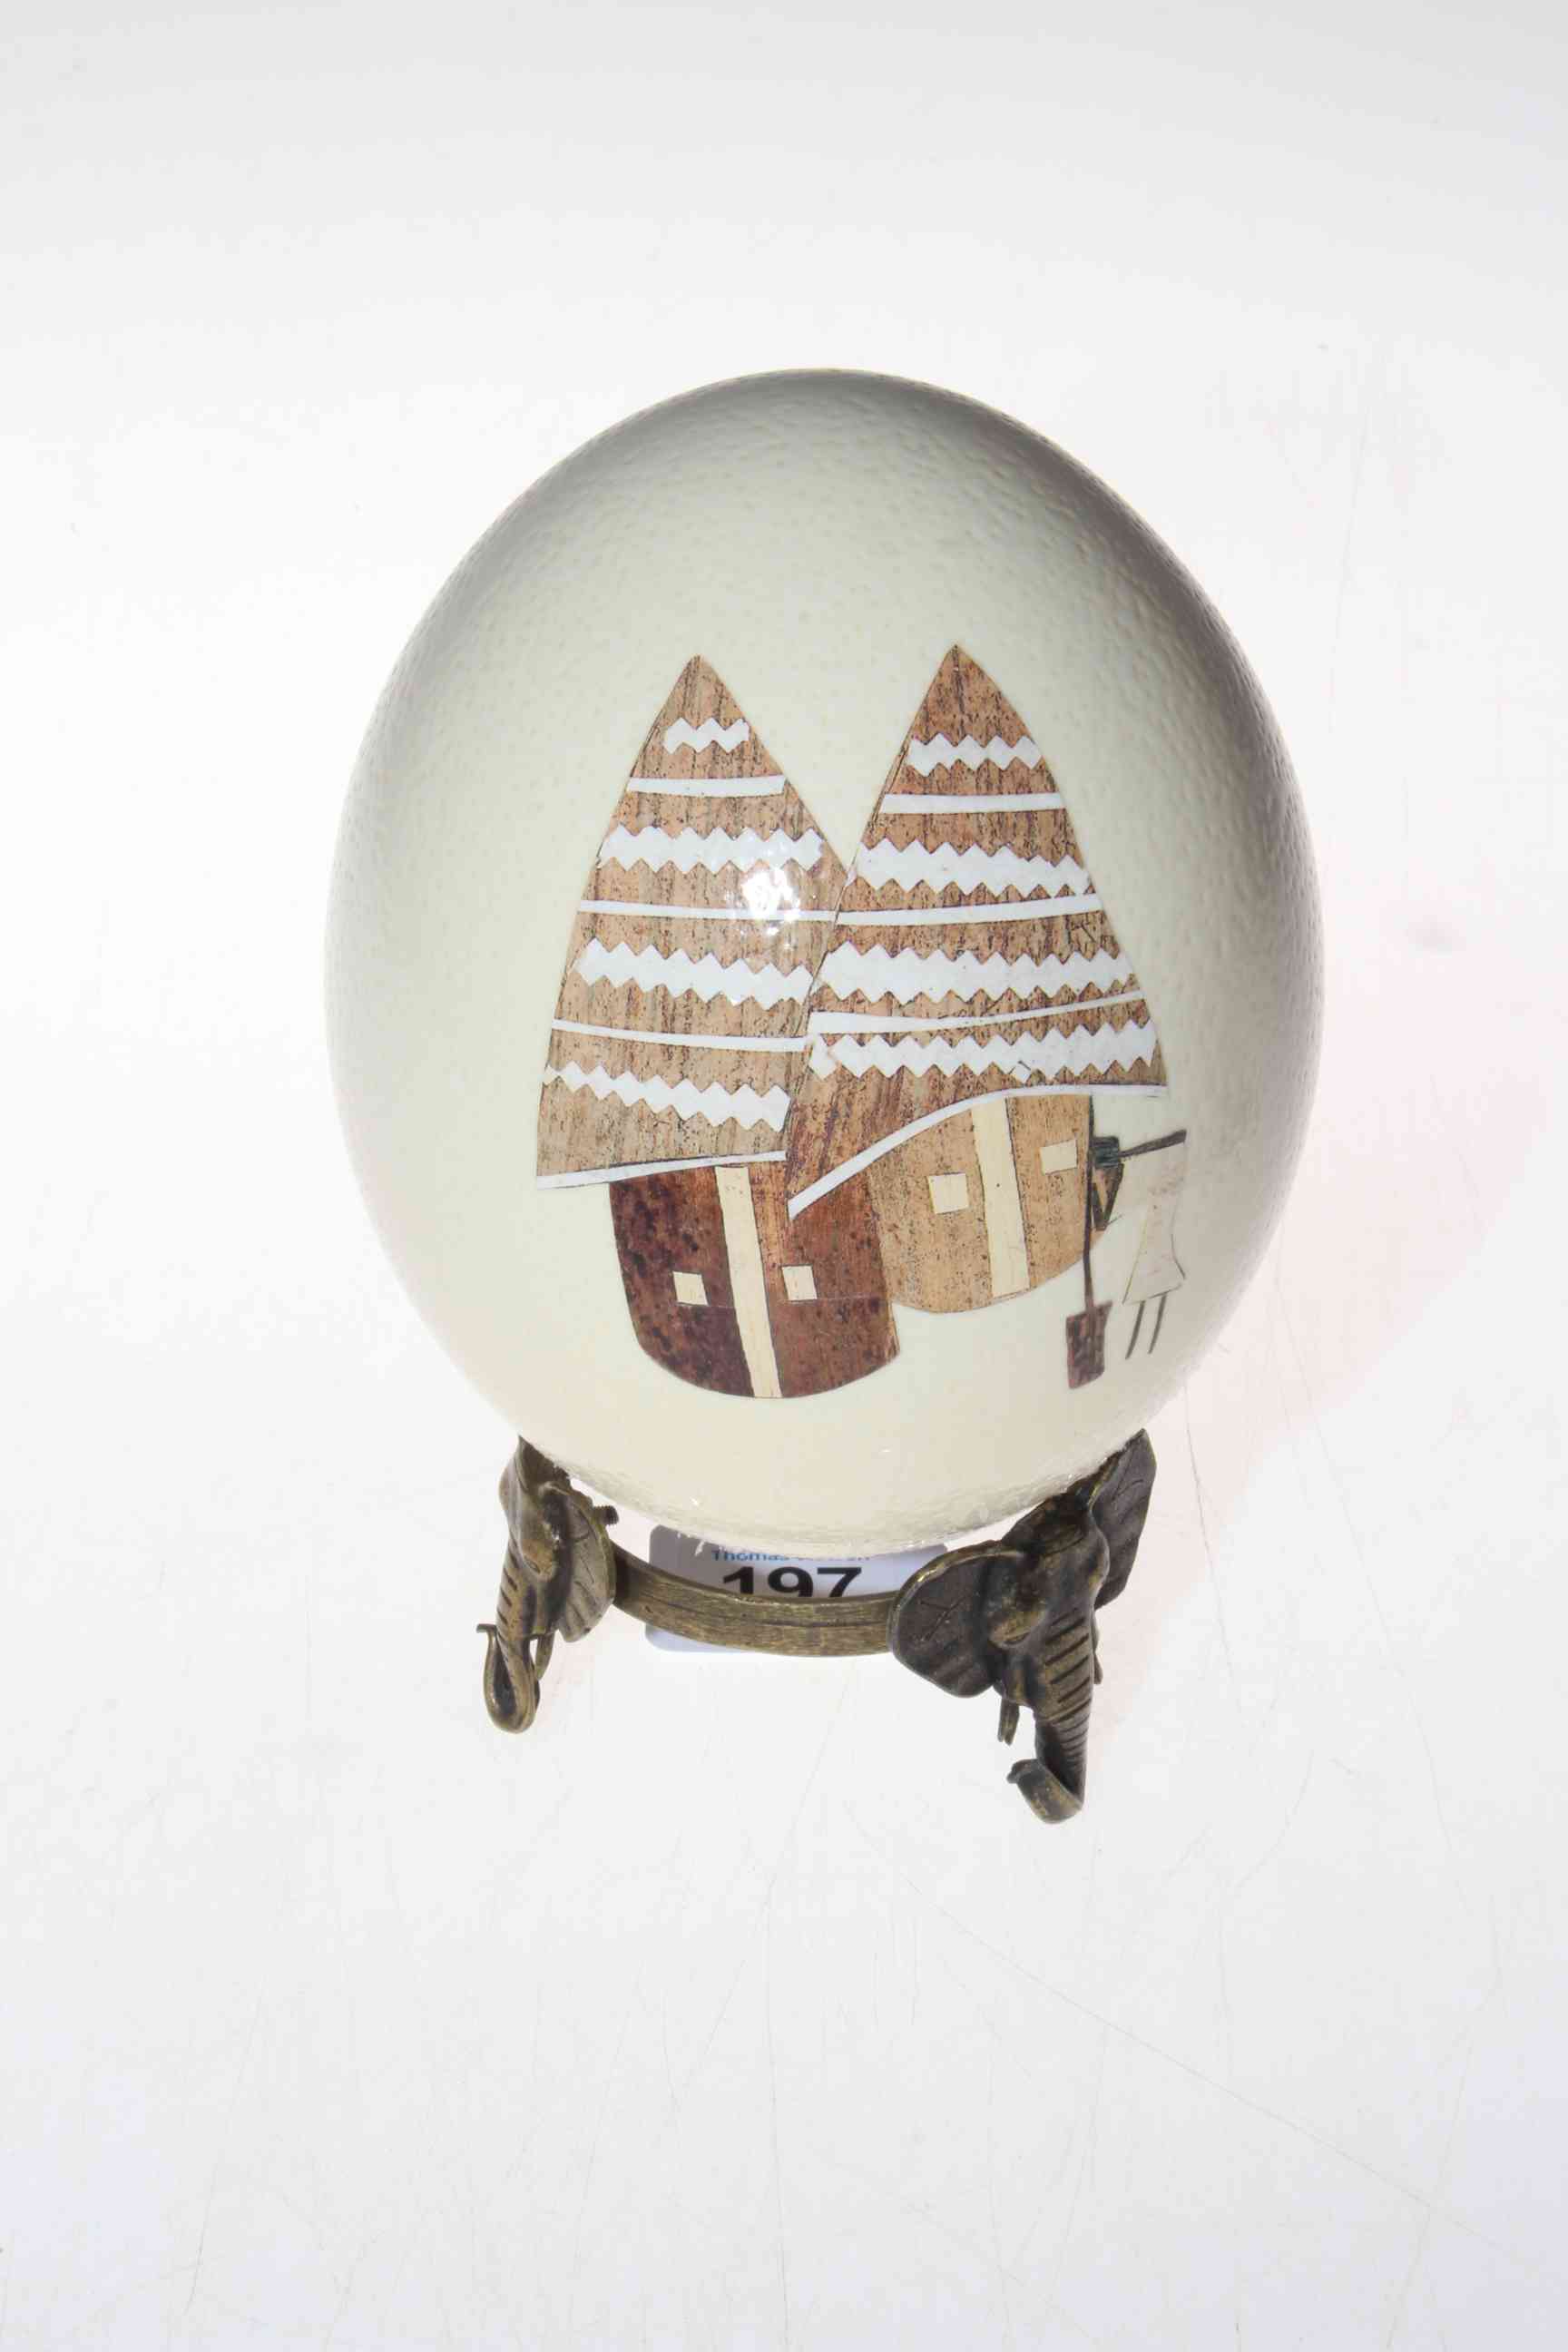 Ostrich egg decorated with figures on metal elephant mask stand. - Image 2 of 2